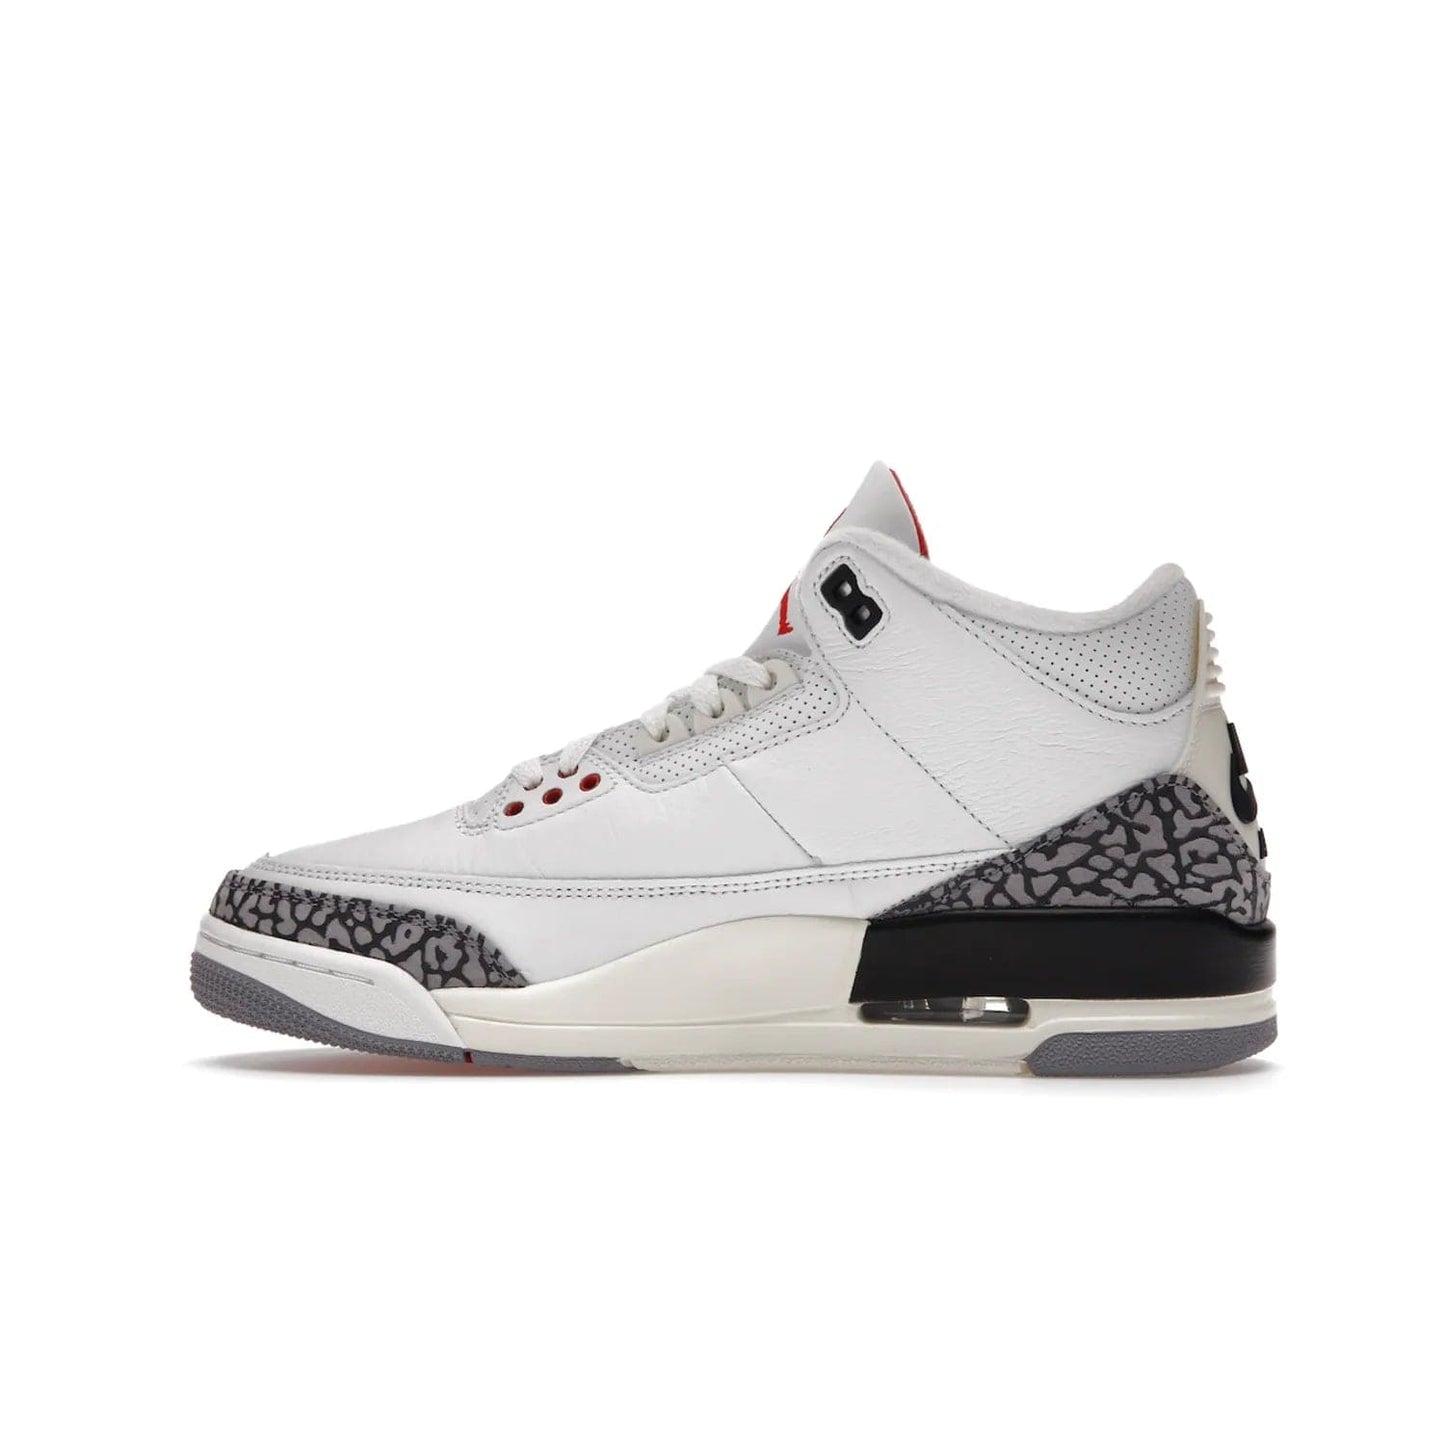 Jordan 3 Retro White Cement Reimagined - Image 20 - Only at www.BallersClubKickz.com - The Reimagined Air Jordan 3 Retro in a Summit White/Fire Red/Black/Cement Grey colorway is launching on March 11, 2023. Featuring a white leather upper, off-white midsoles and heel tabs, this vintage-look sneaker is a must-have.